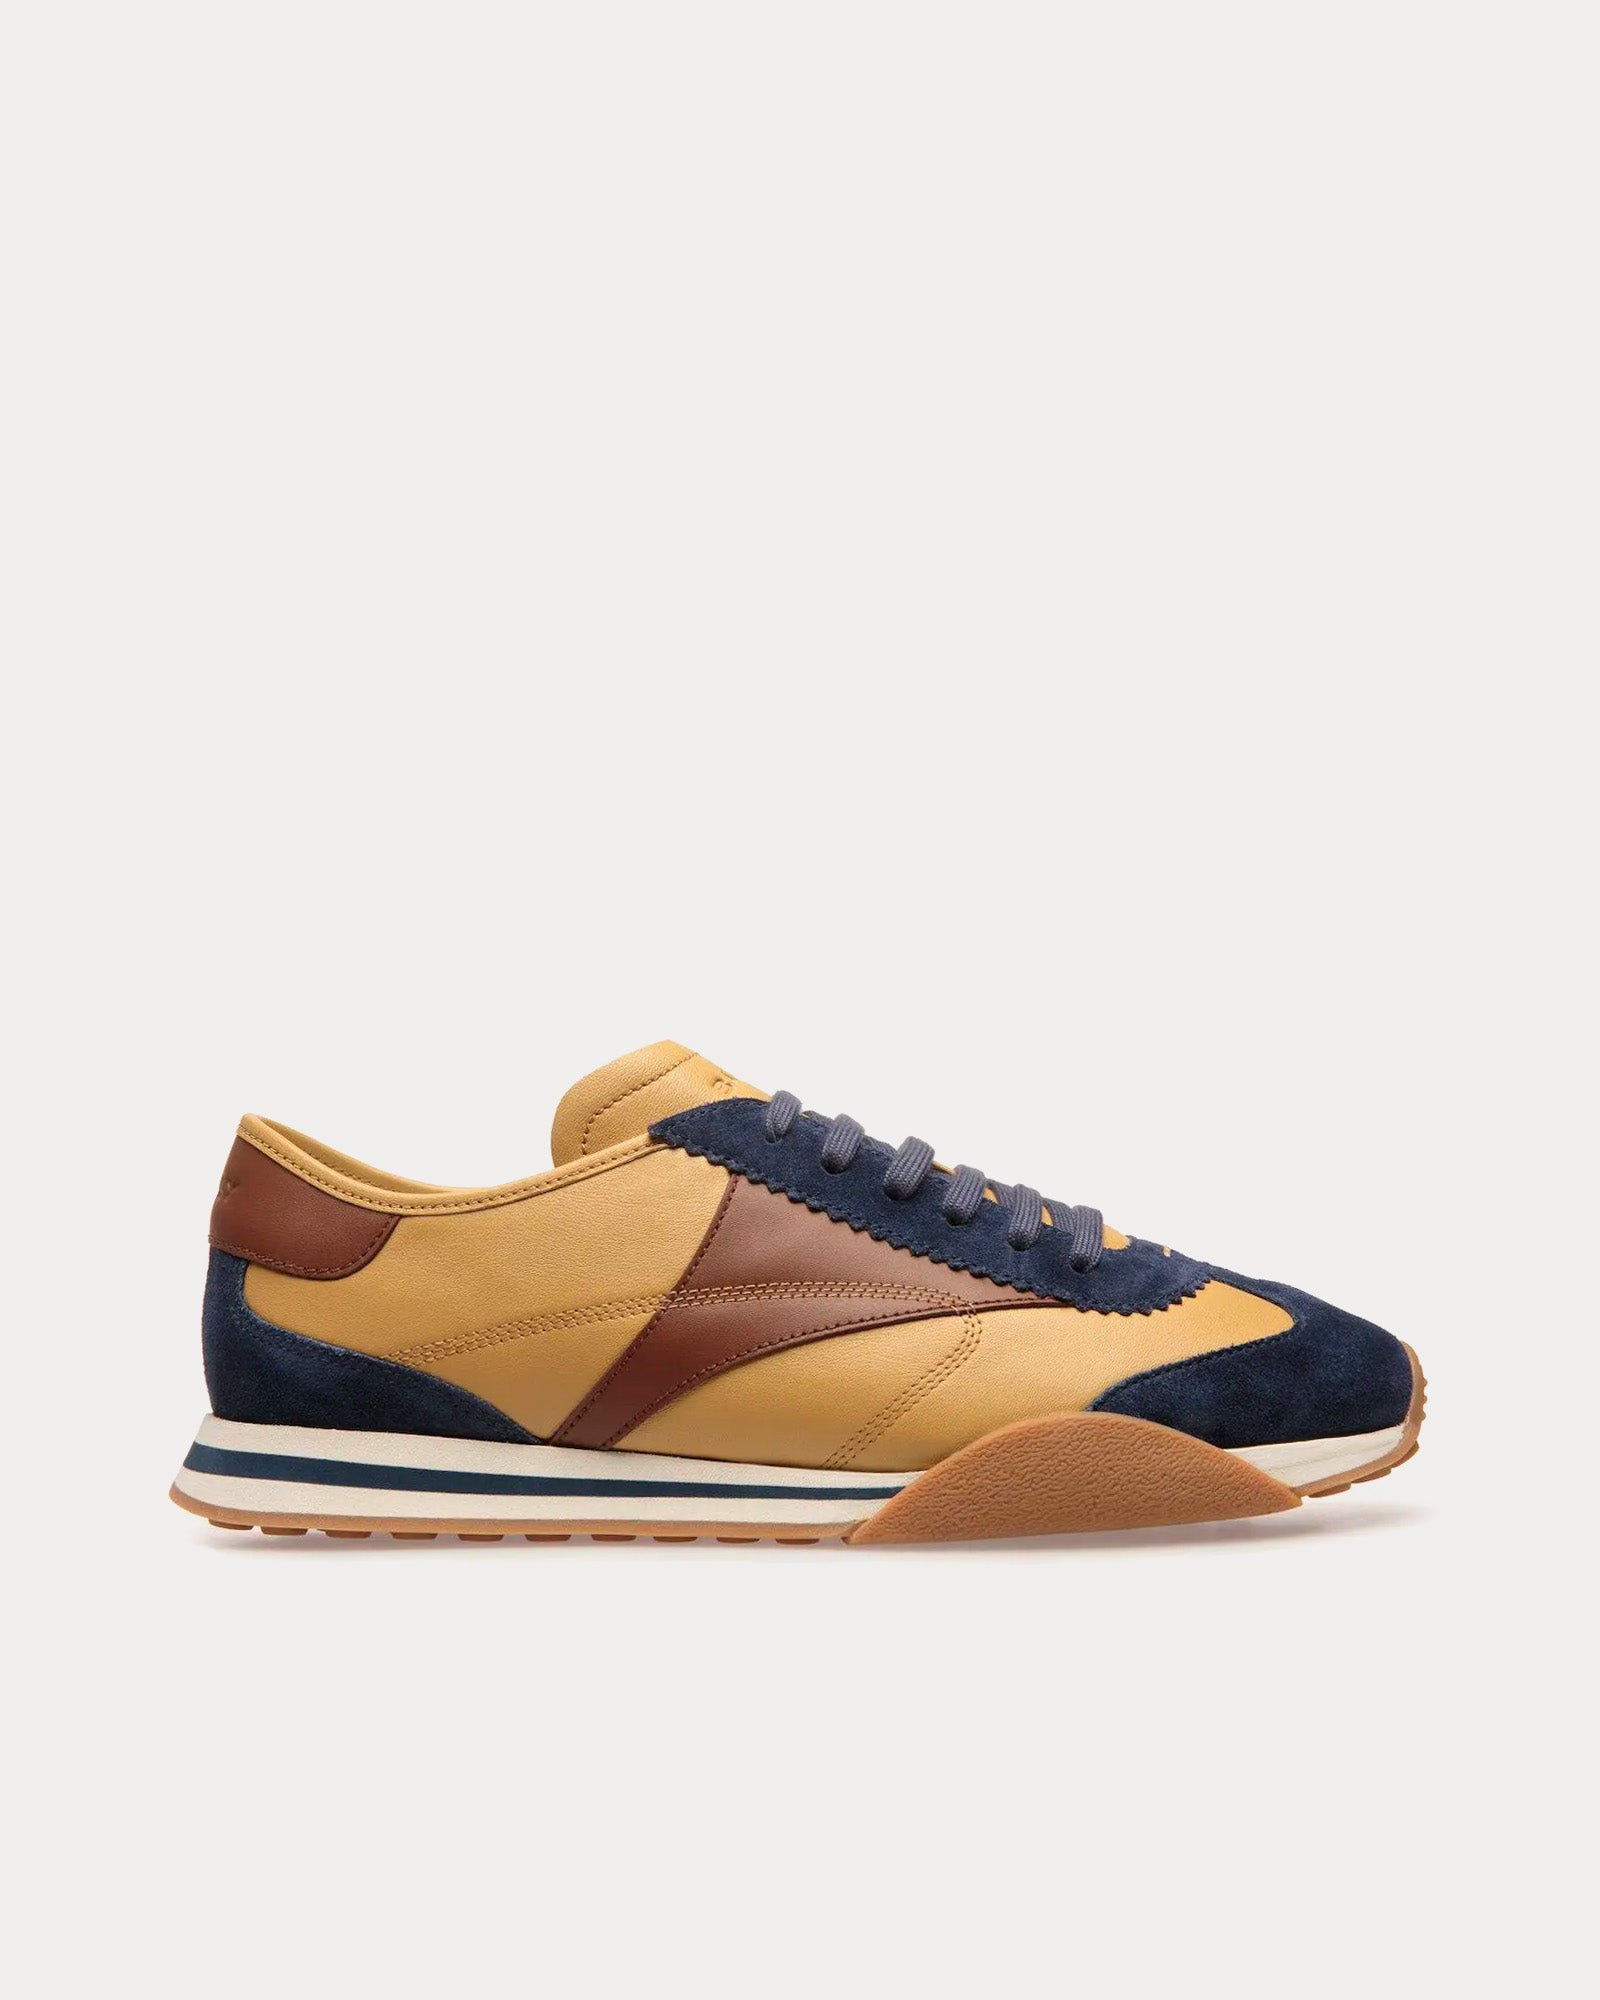 Bally - Sussex Leather & Fabric Brown / Navy Low Top Sneakers